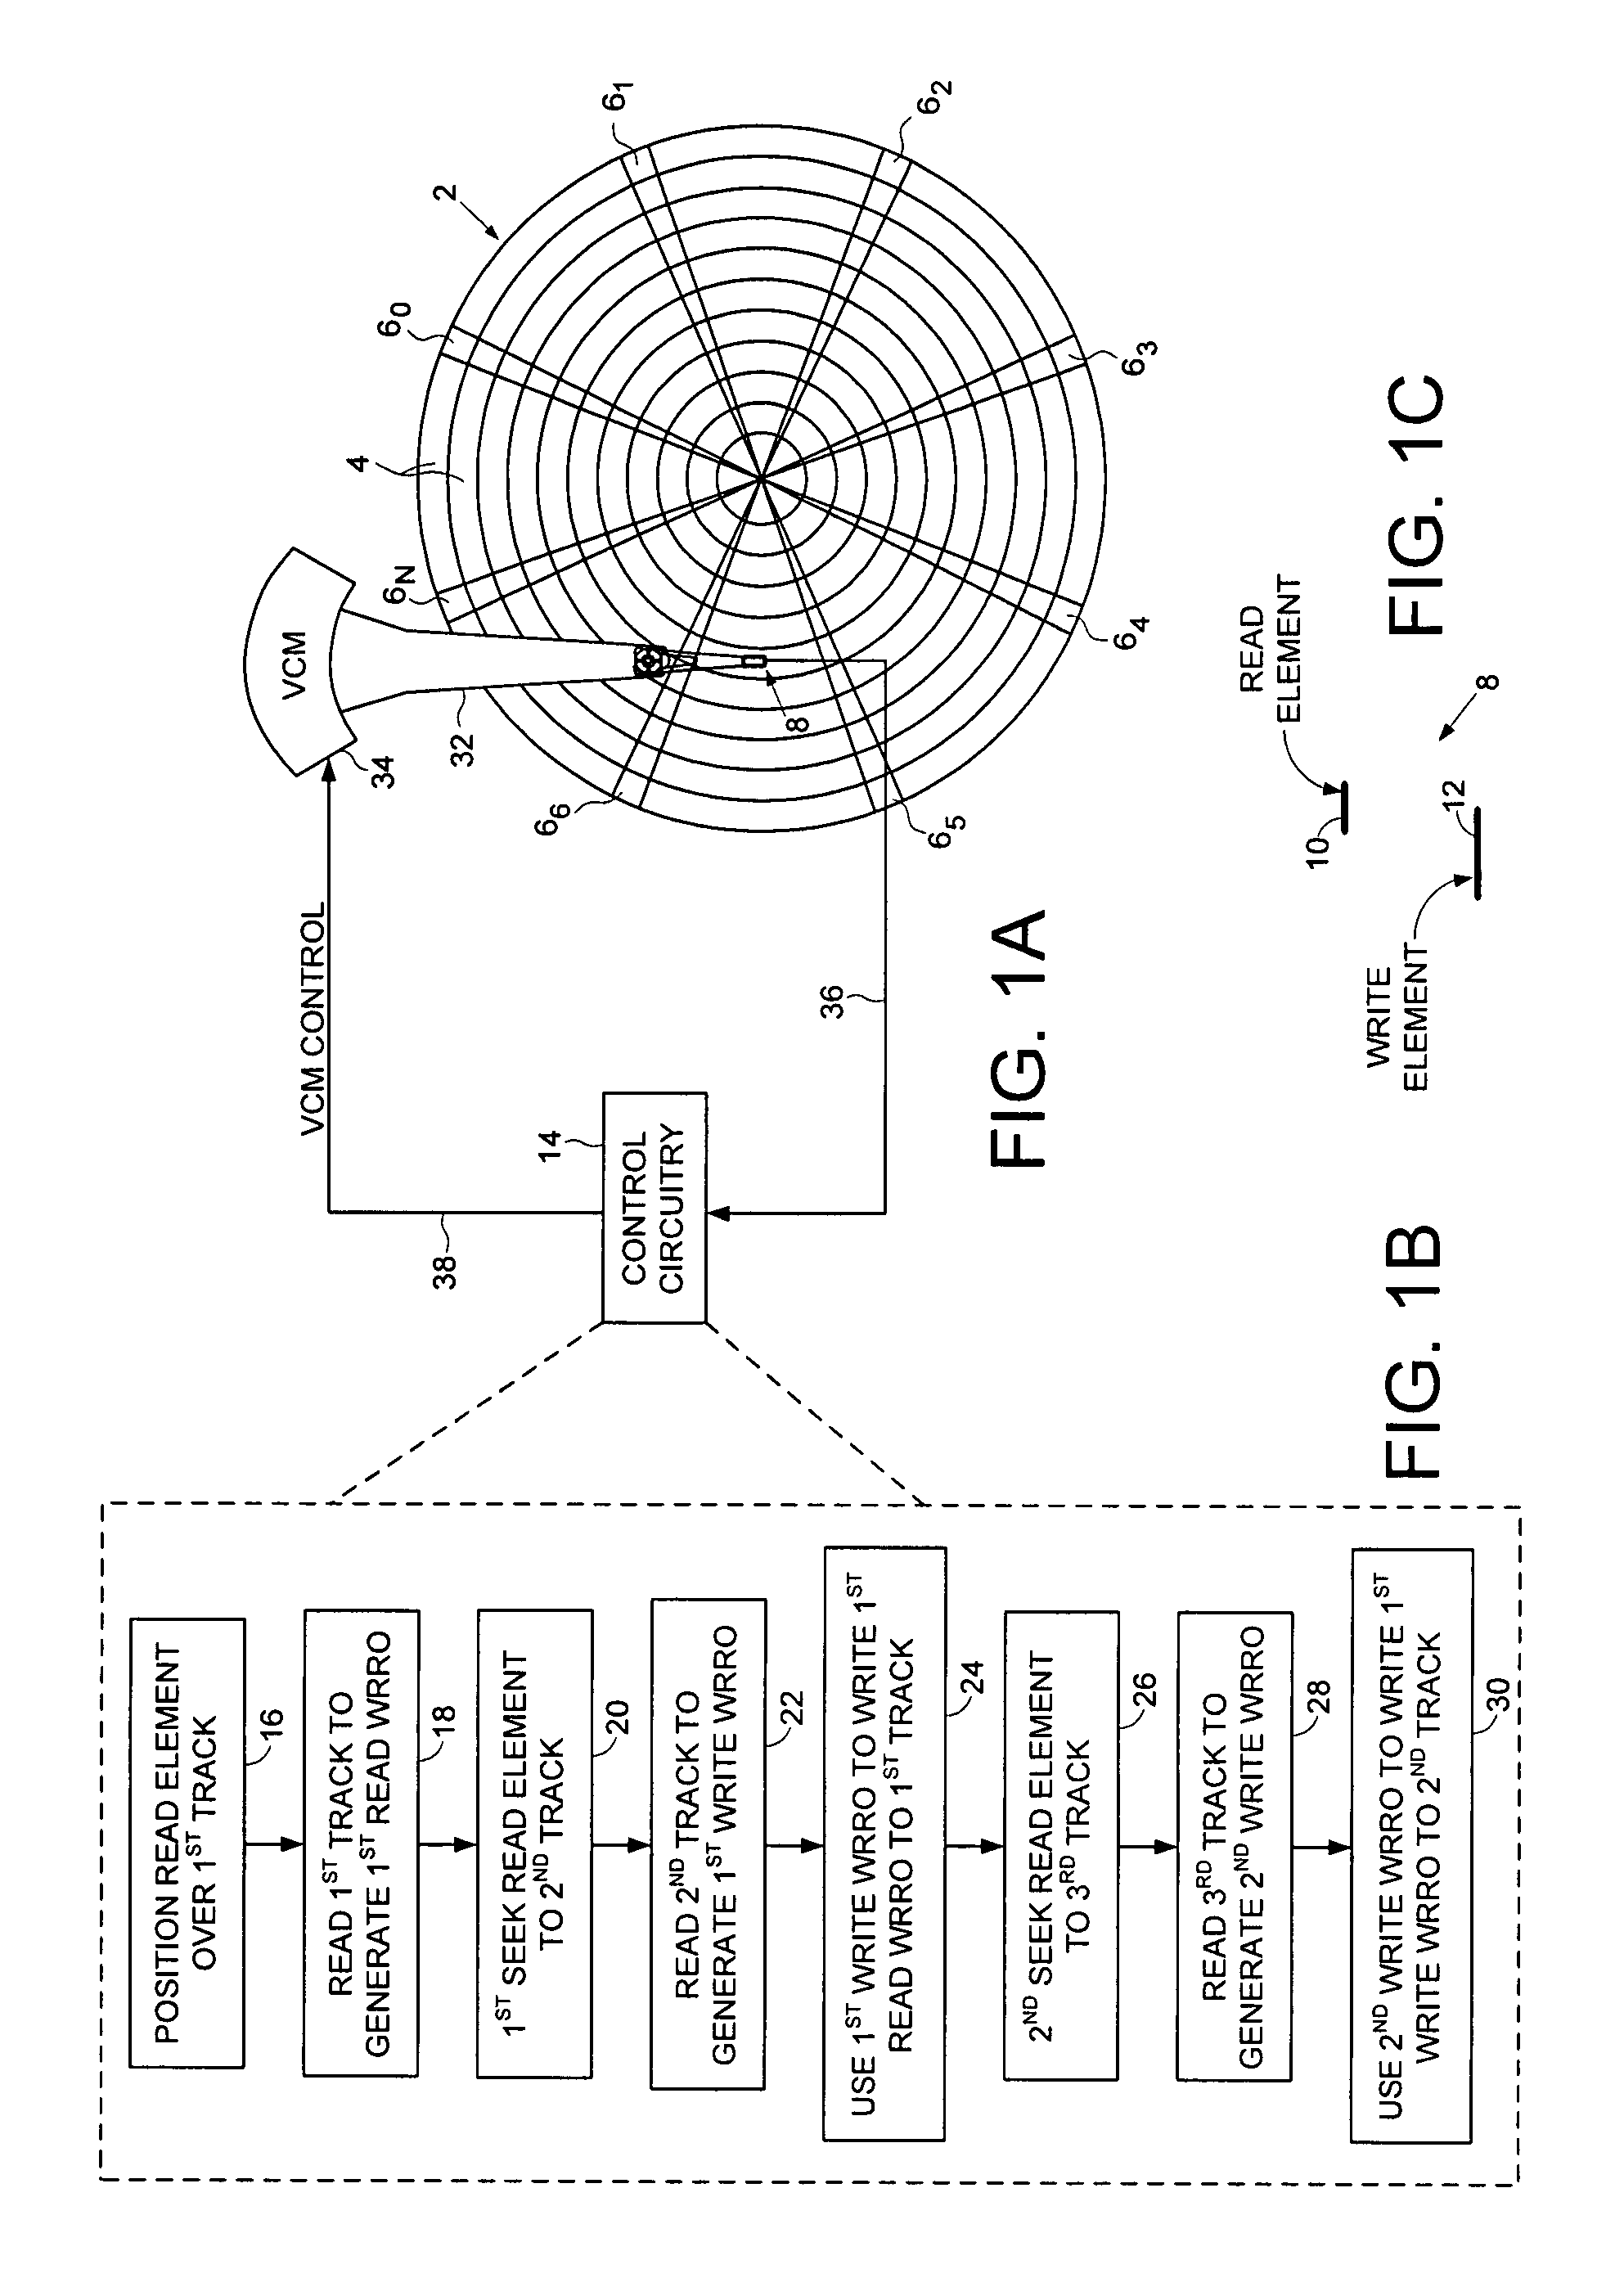 Disk drive writing wedge RRO values in a butterfly pattern